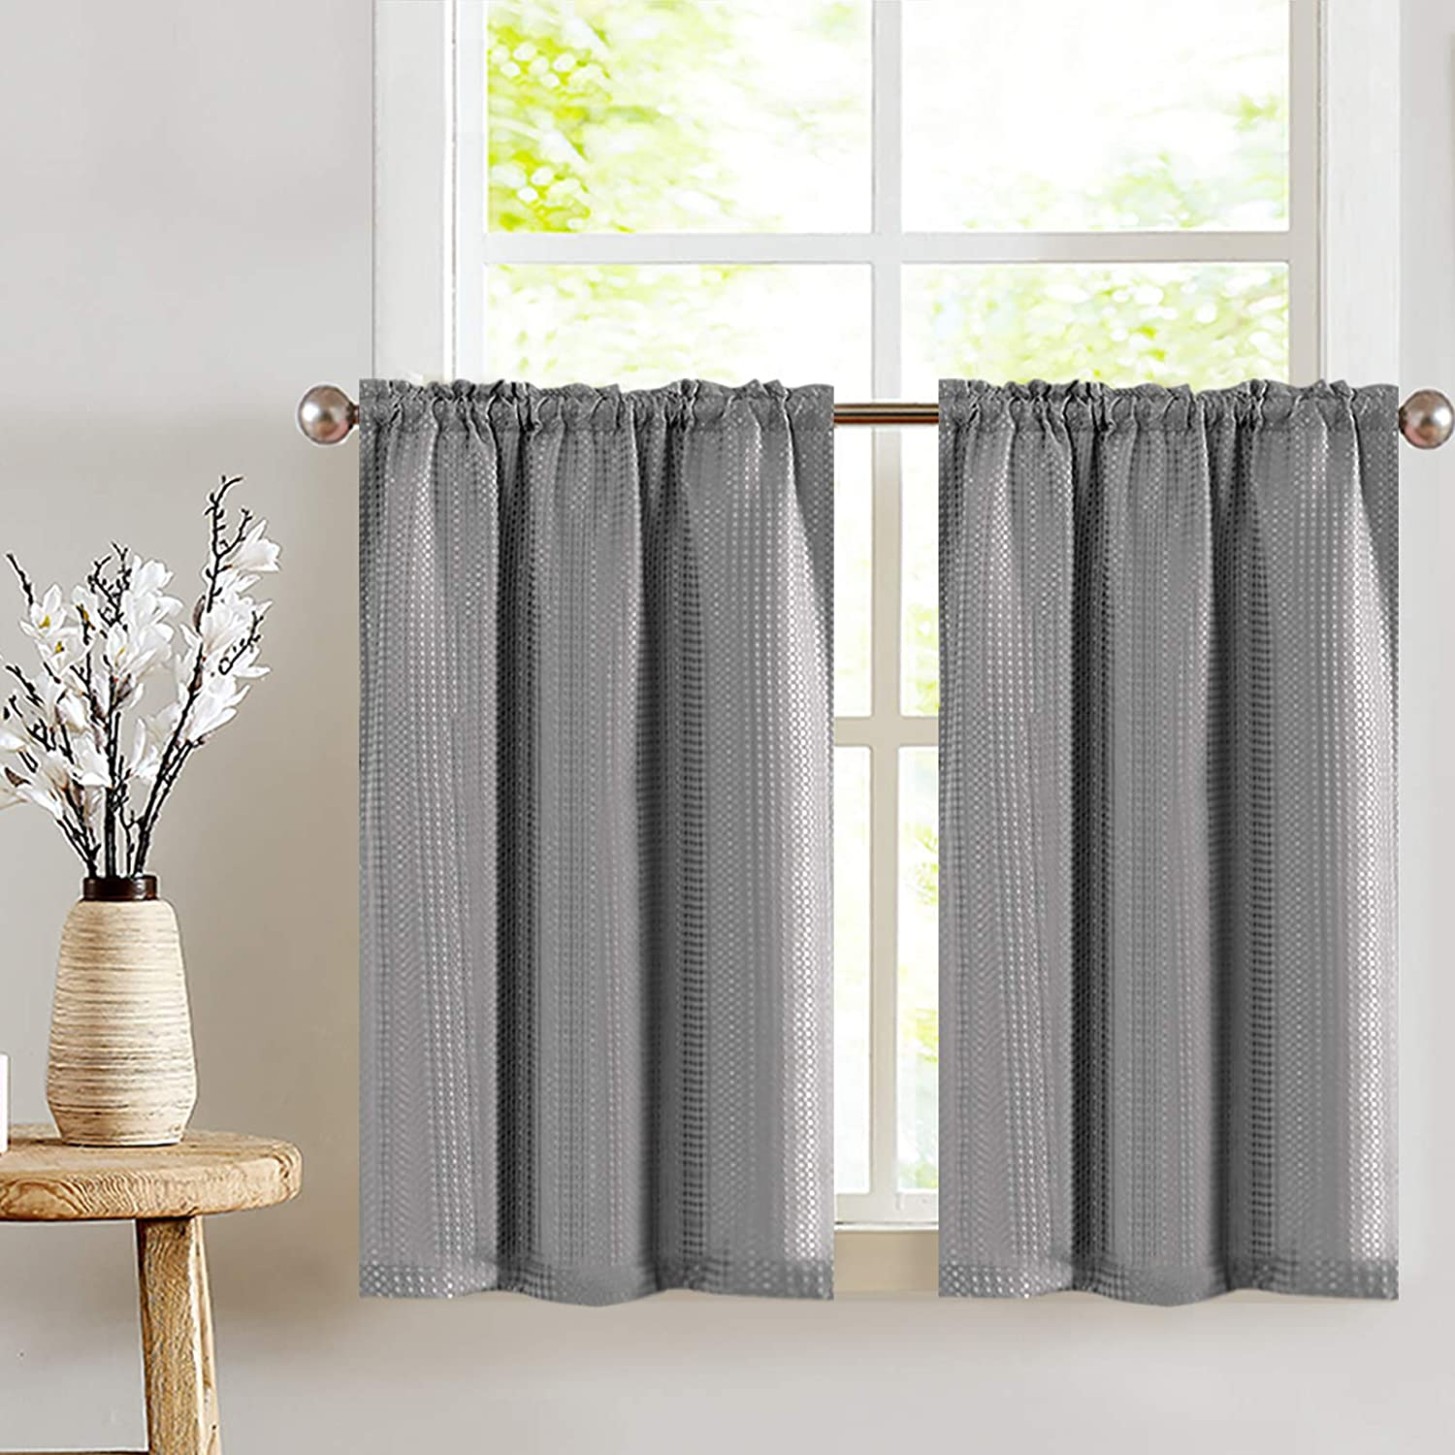 Lazzzy Grey Kitchen Curtains Cafe Curtains 4 Inch Gray Waffle Textured  Tier Curtains for Bathroom Half Window Curtain Set for Living Room Bedroom   - grey kitchen curtains